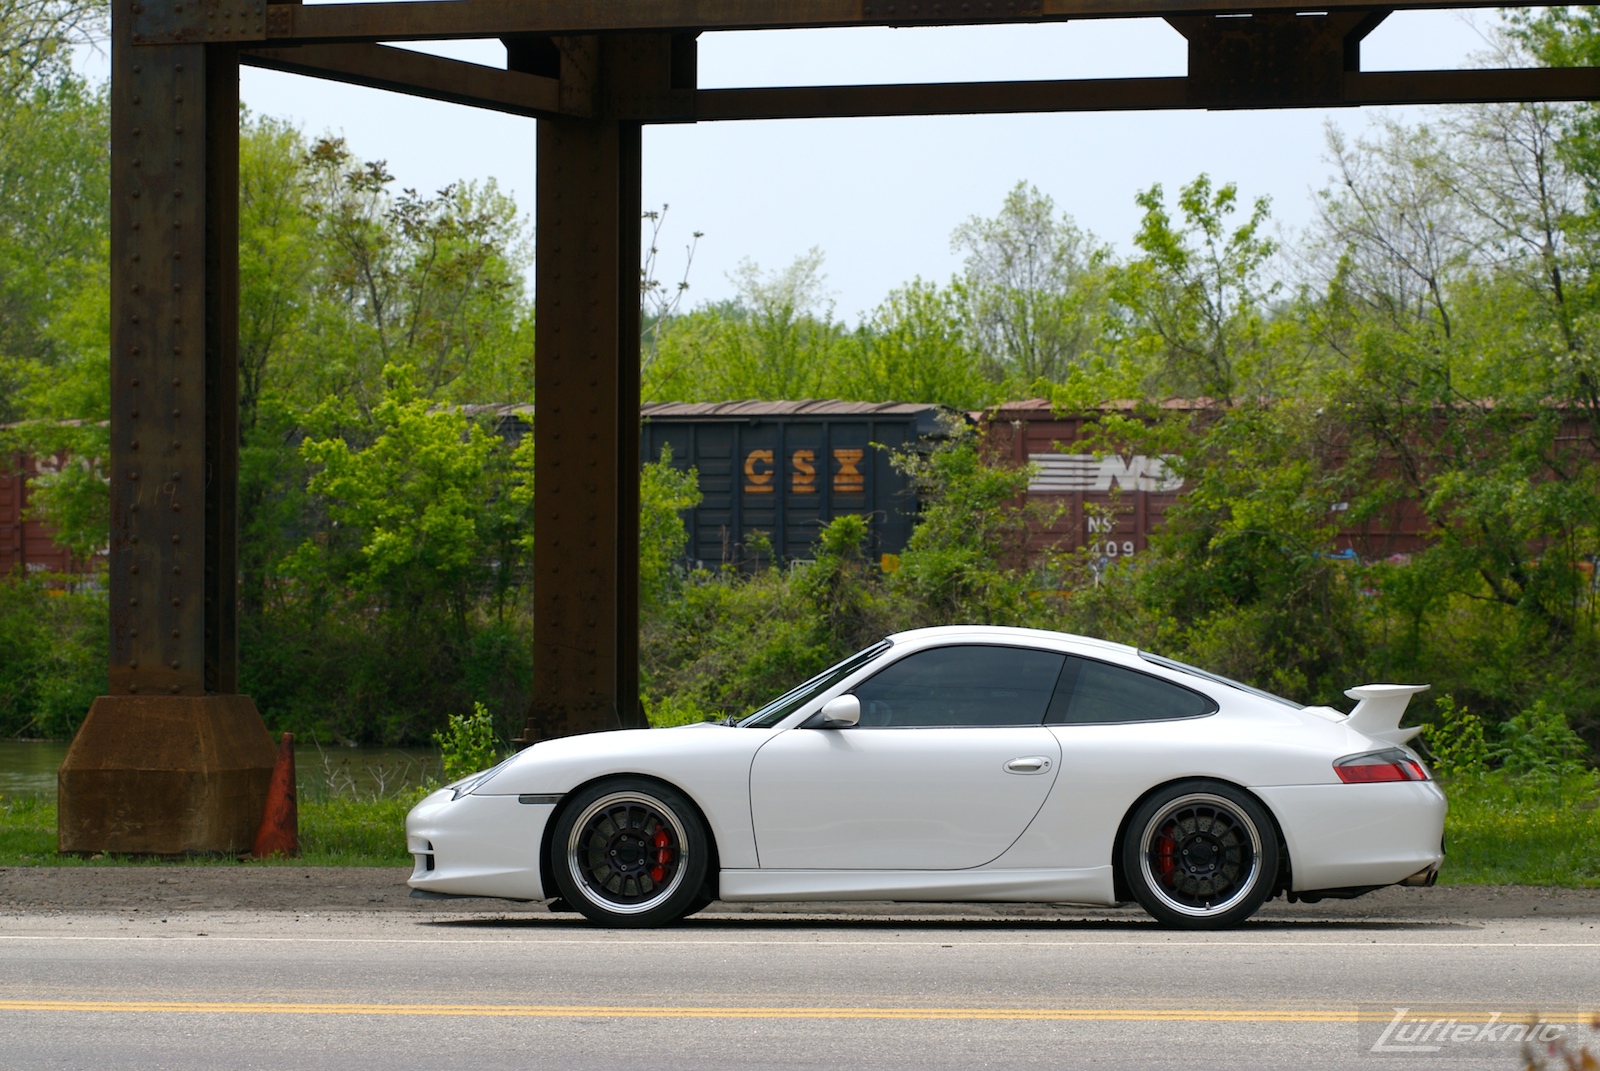 A track-prepped white Porsche 996 Gt3 with Fikse wheels in front of a train.